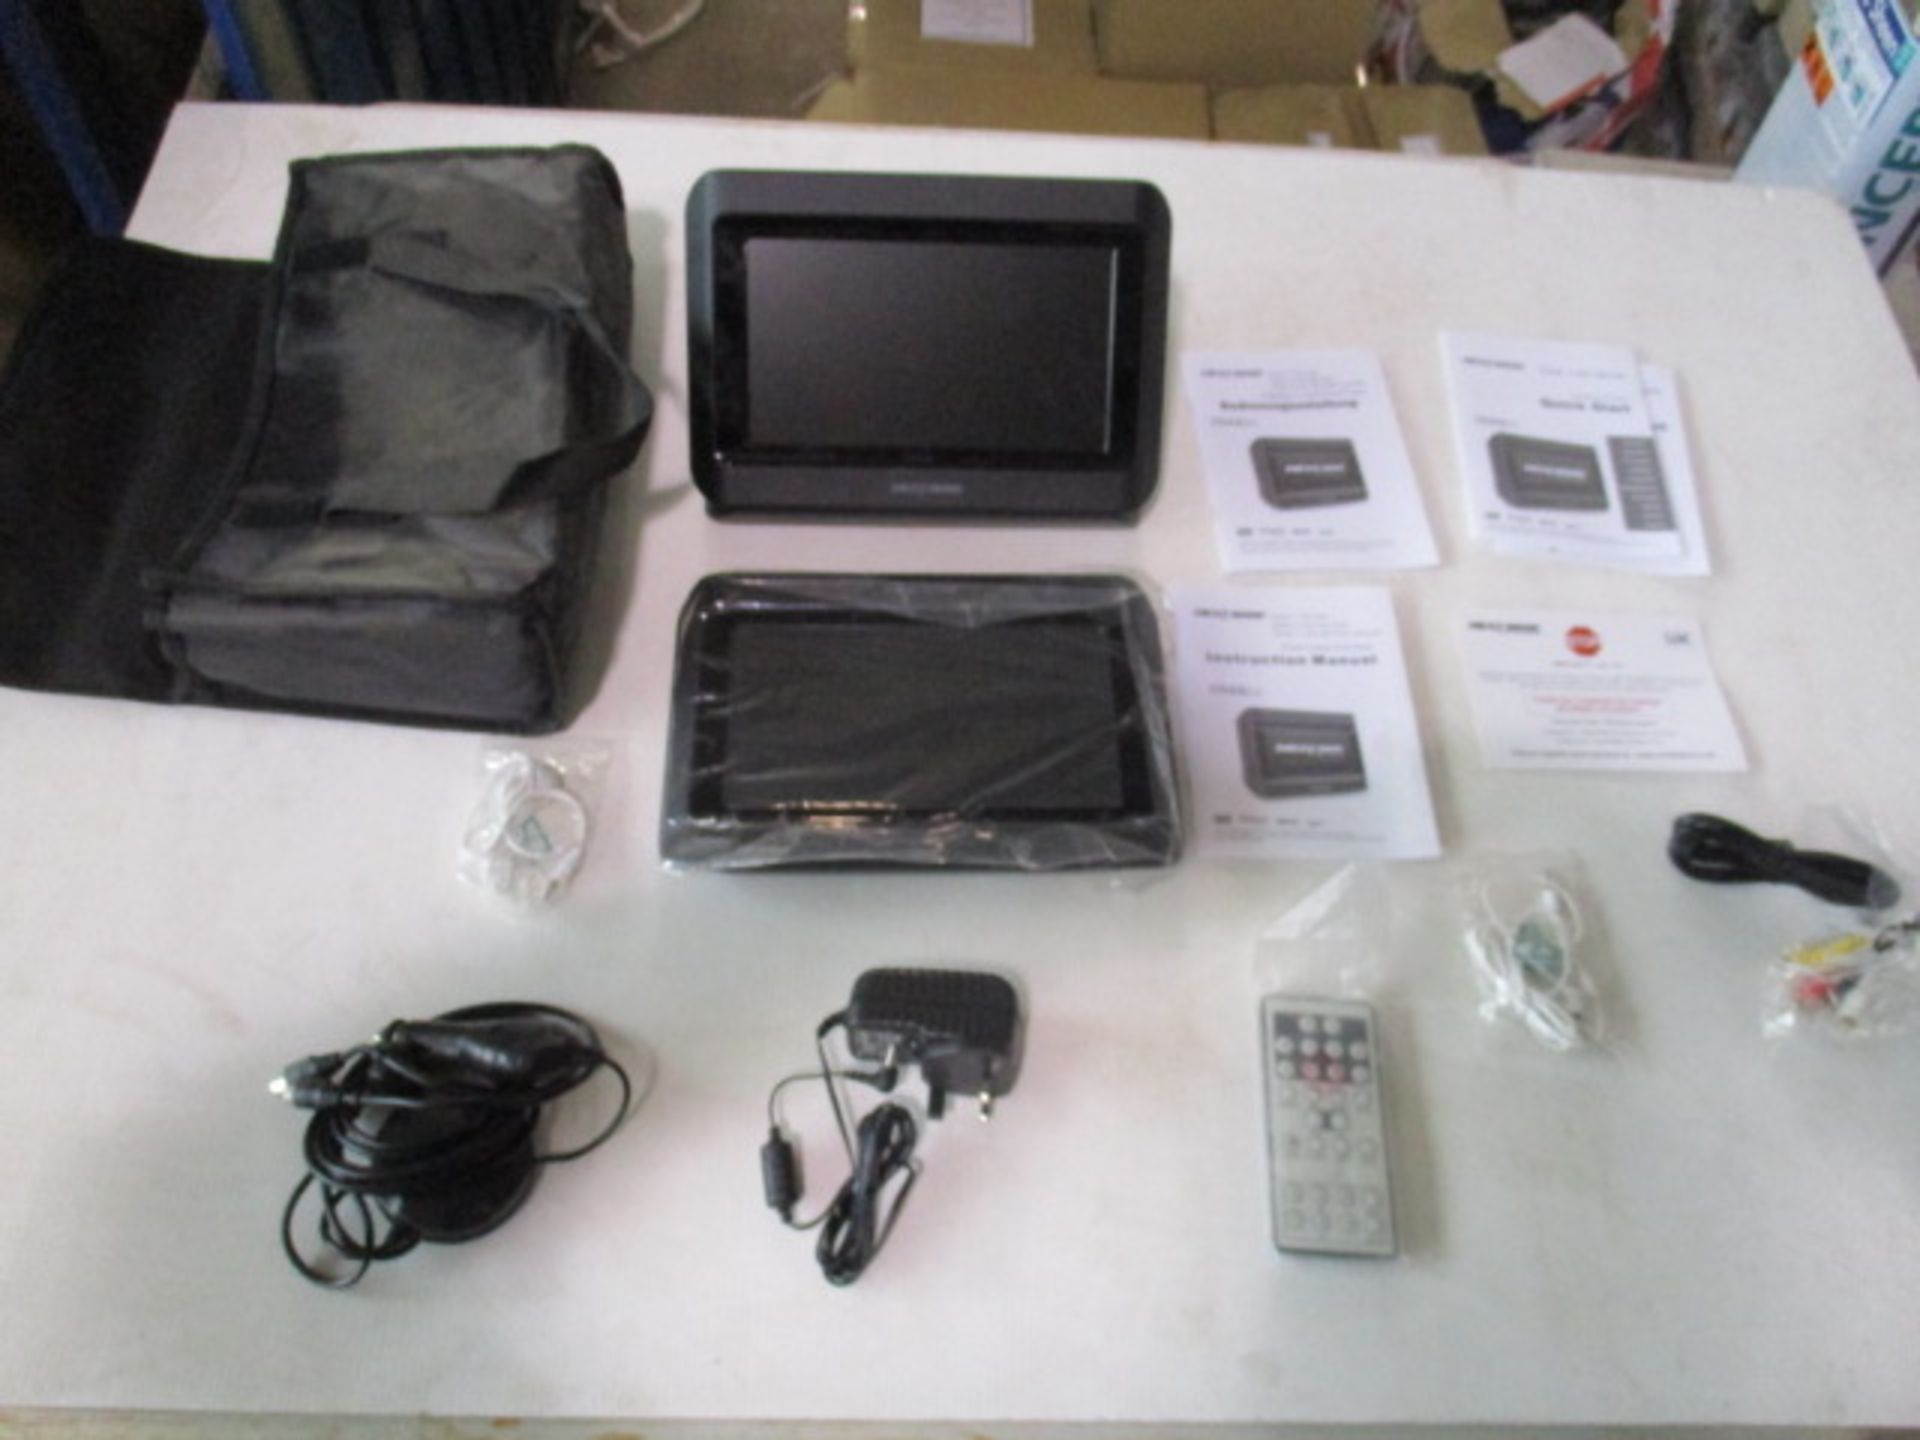 Unused Next Base 2 x monitors plus portable DVD player with all attachements and remote as